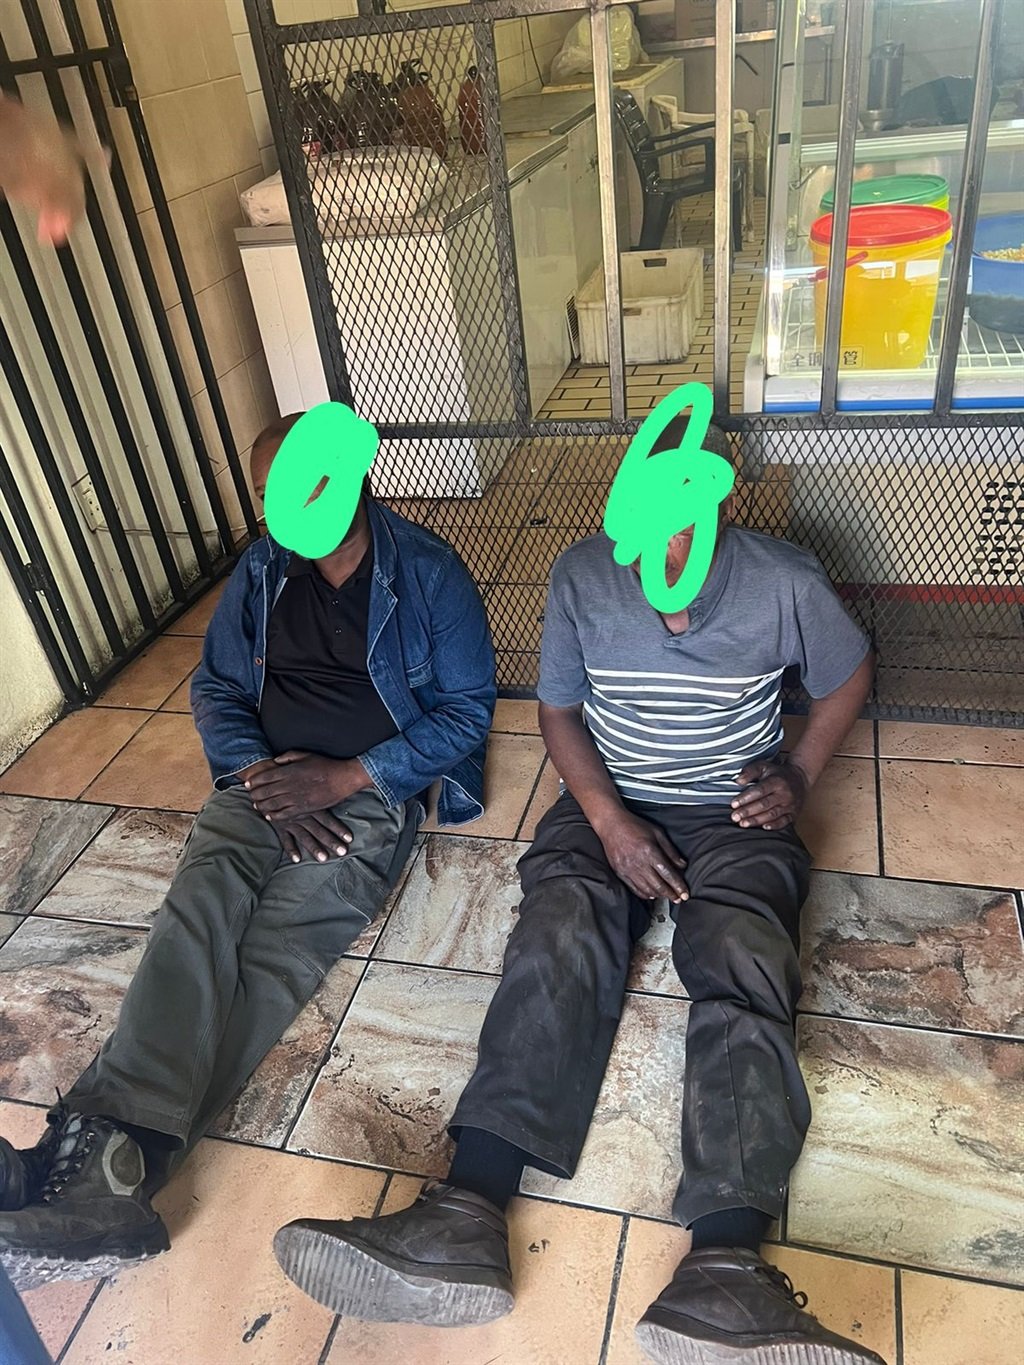 The suspects were arrested while offloading meat at the butchery.